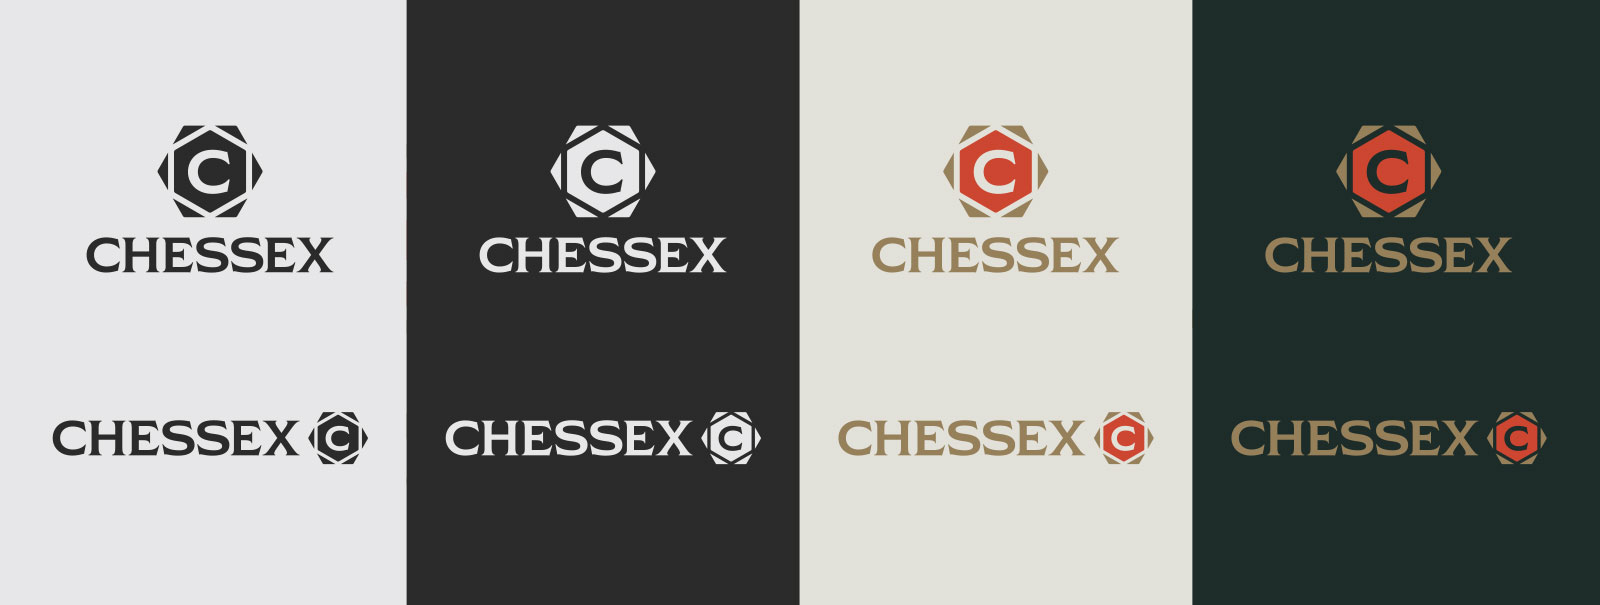 Proposed logo color options